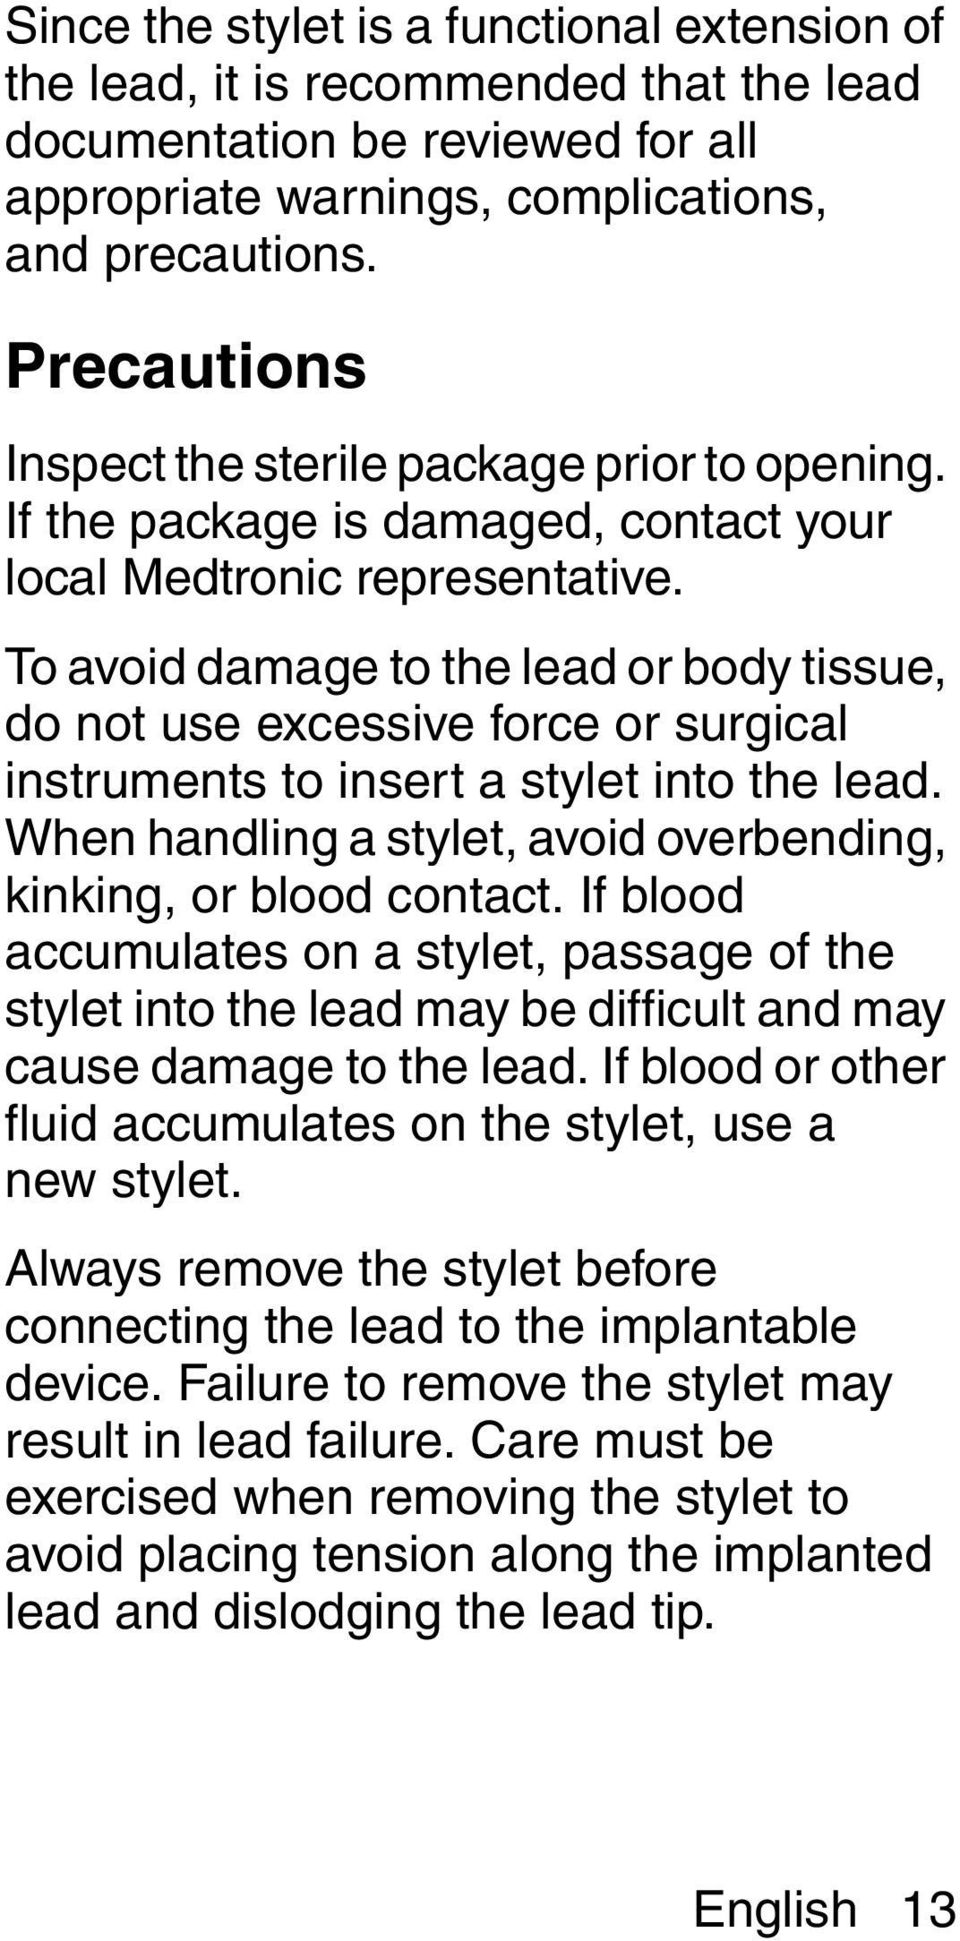 To avoid damage to the lead or body tissue, do not use excessive force or surgical instruments to insert a stylet into the lead. When handling a stylet, avoid overbending, kinking, or blood contact.